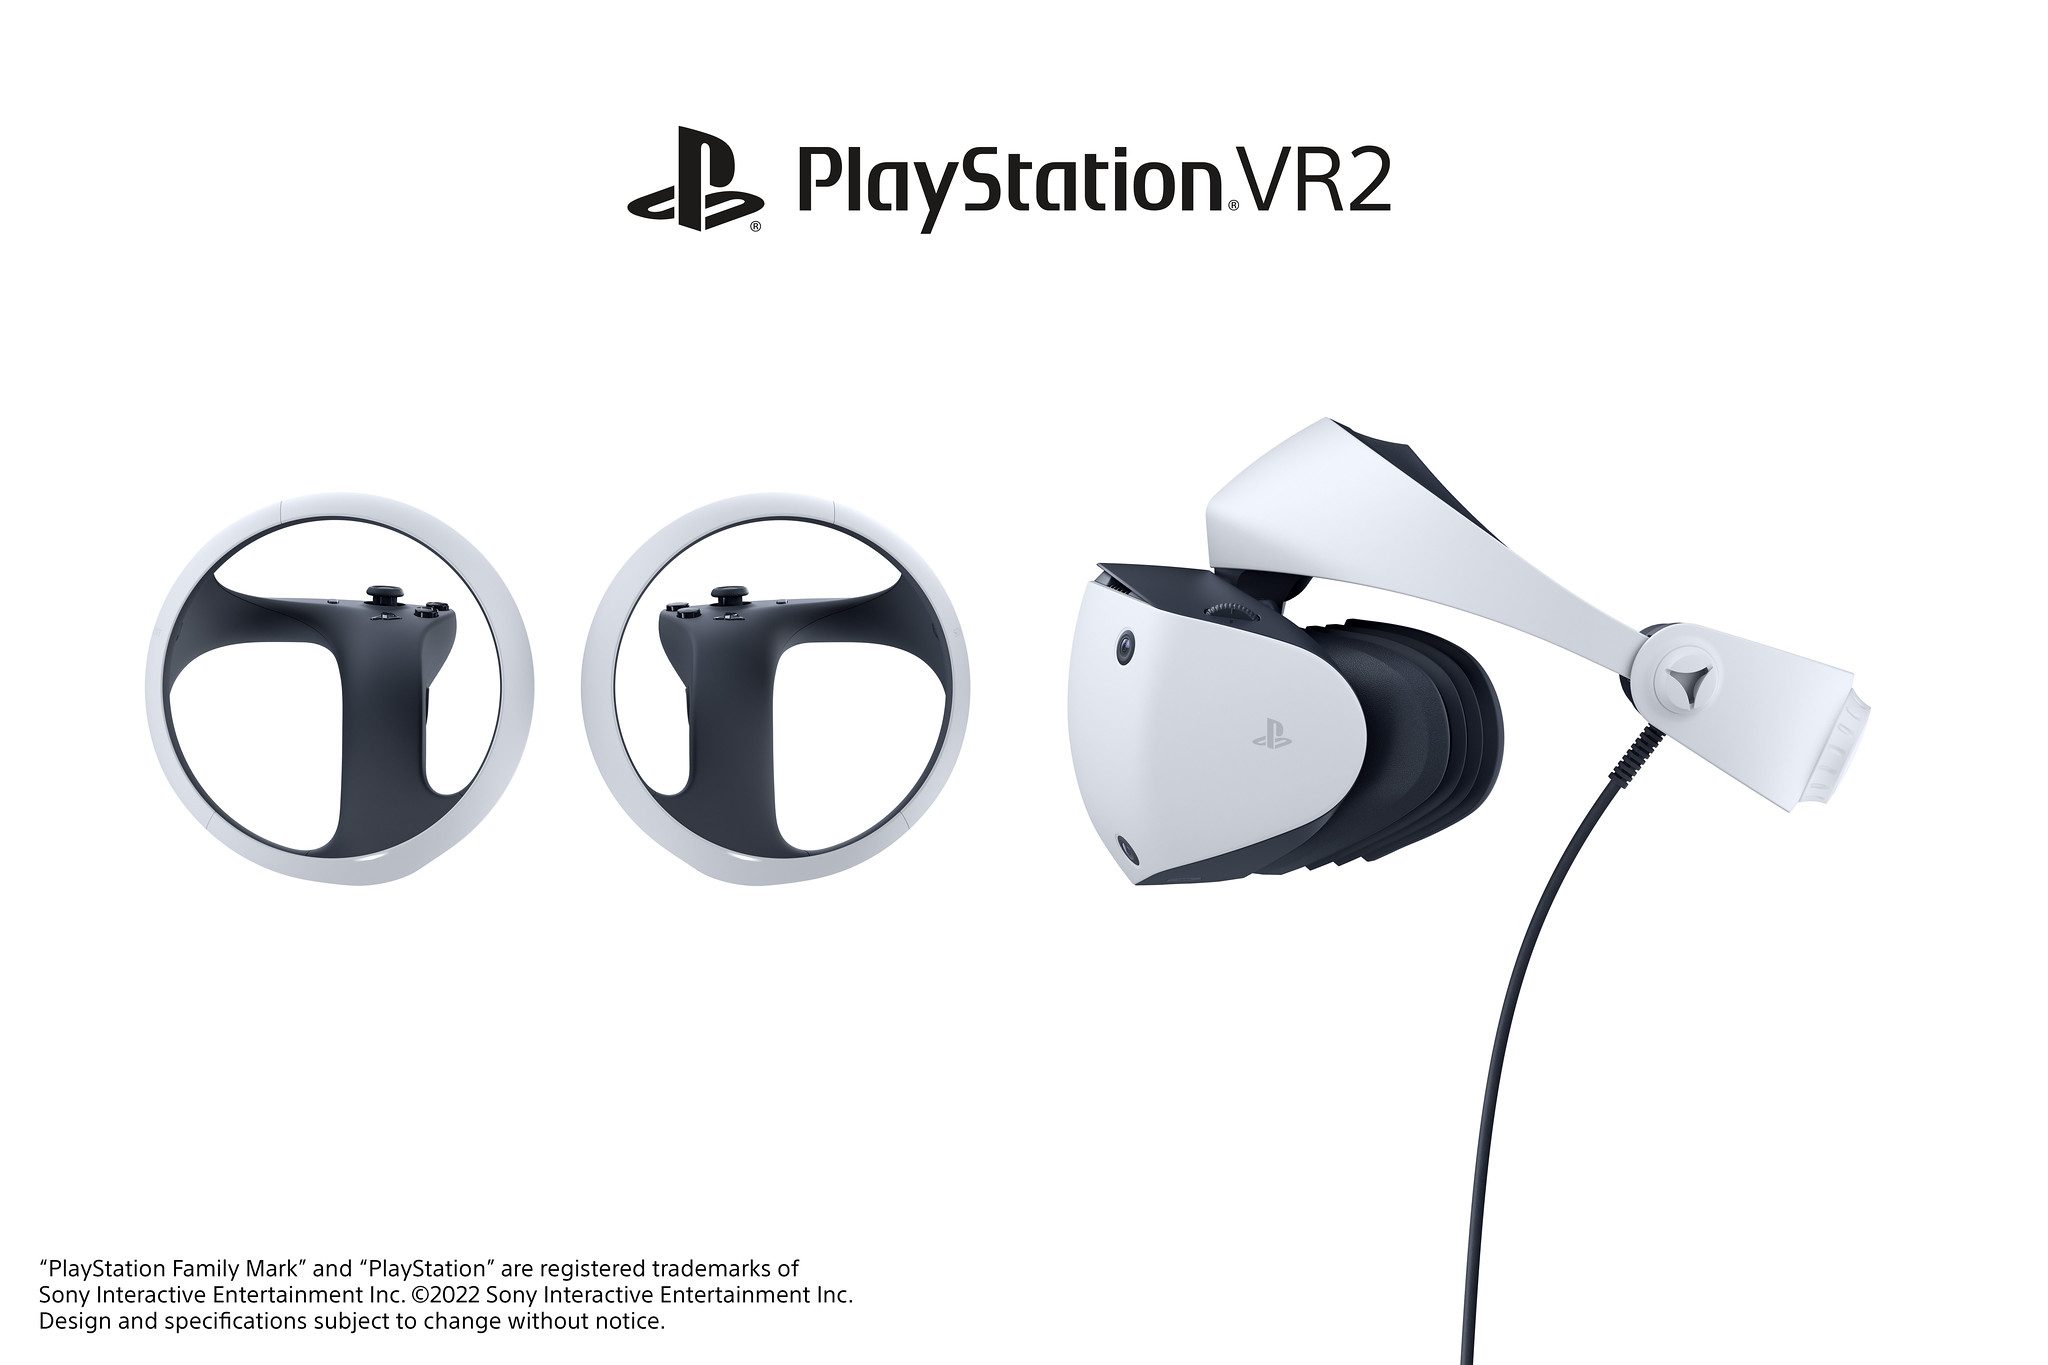 Sony Confirms that Backward Compatibility is Not Available for the PSVR2